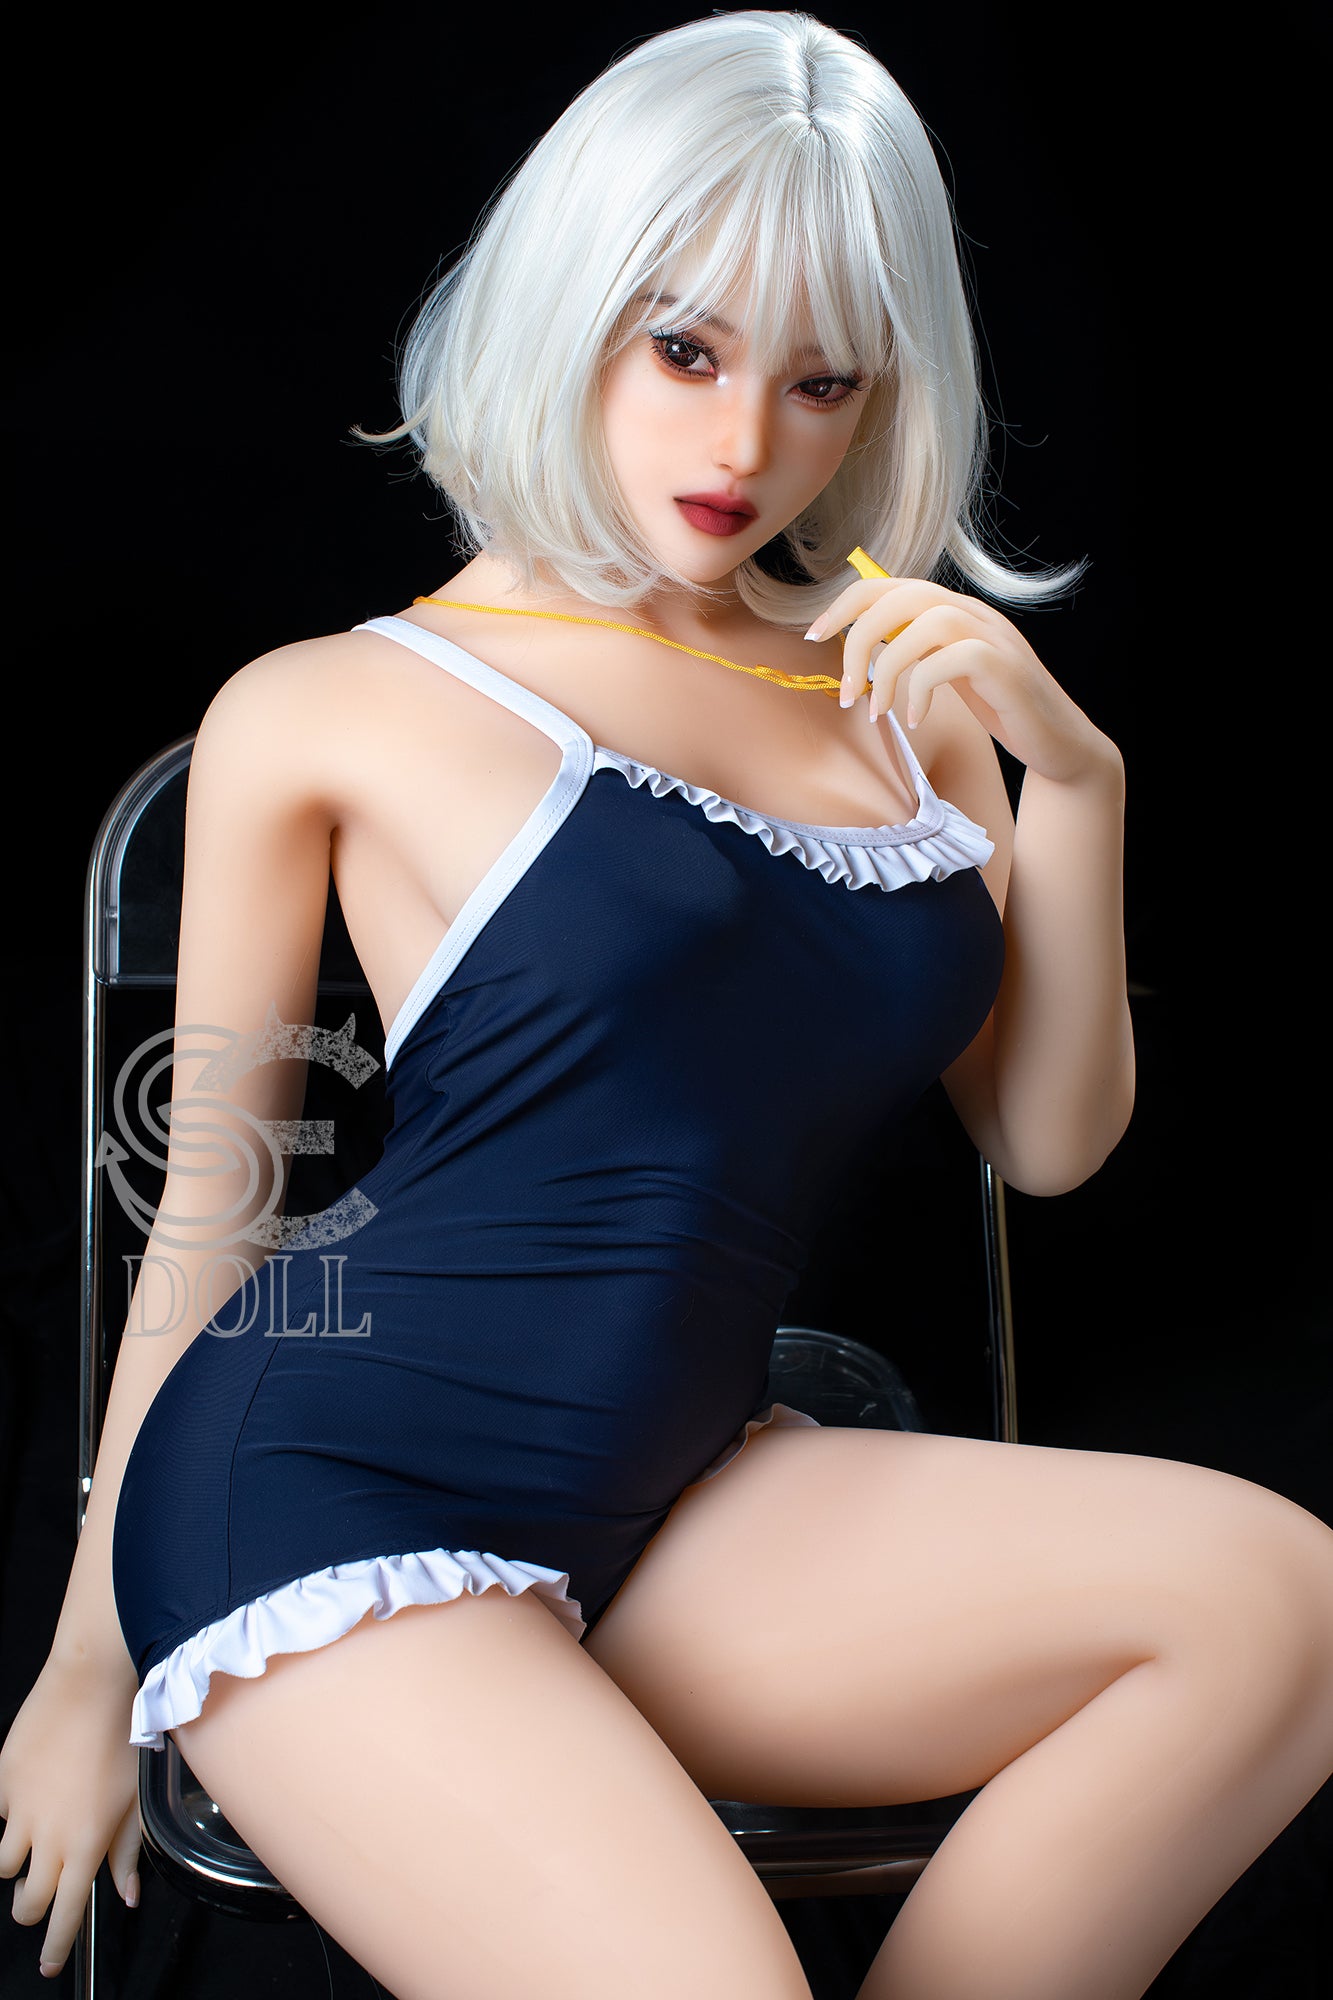 SEDOLL 163 cm E TPE - Mikoto | Buy Sex Dolls at DOLLS ACTUALLY